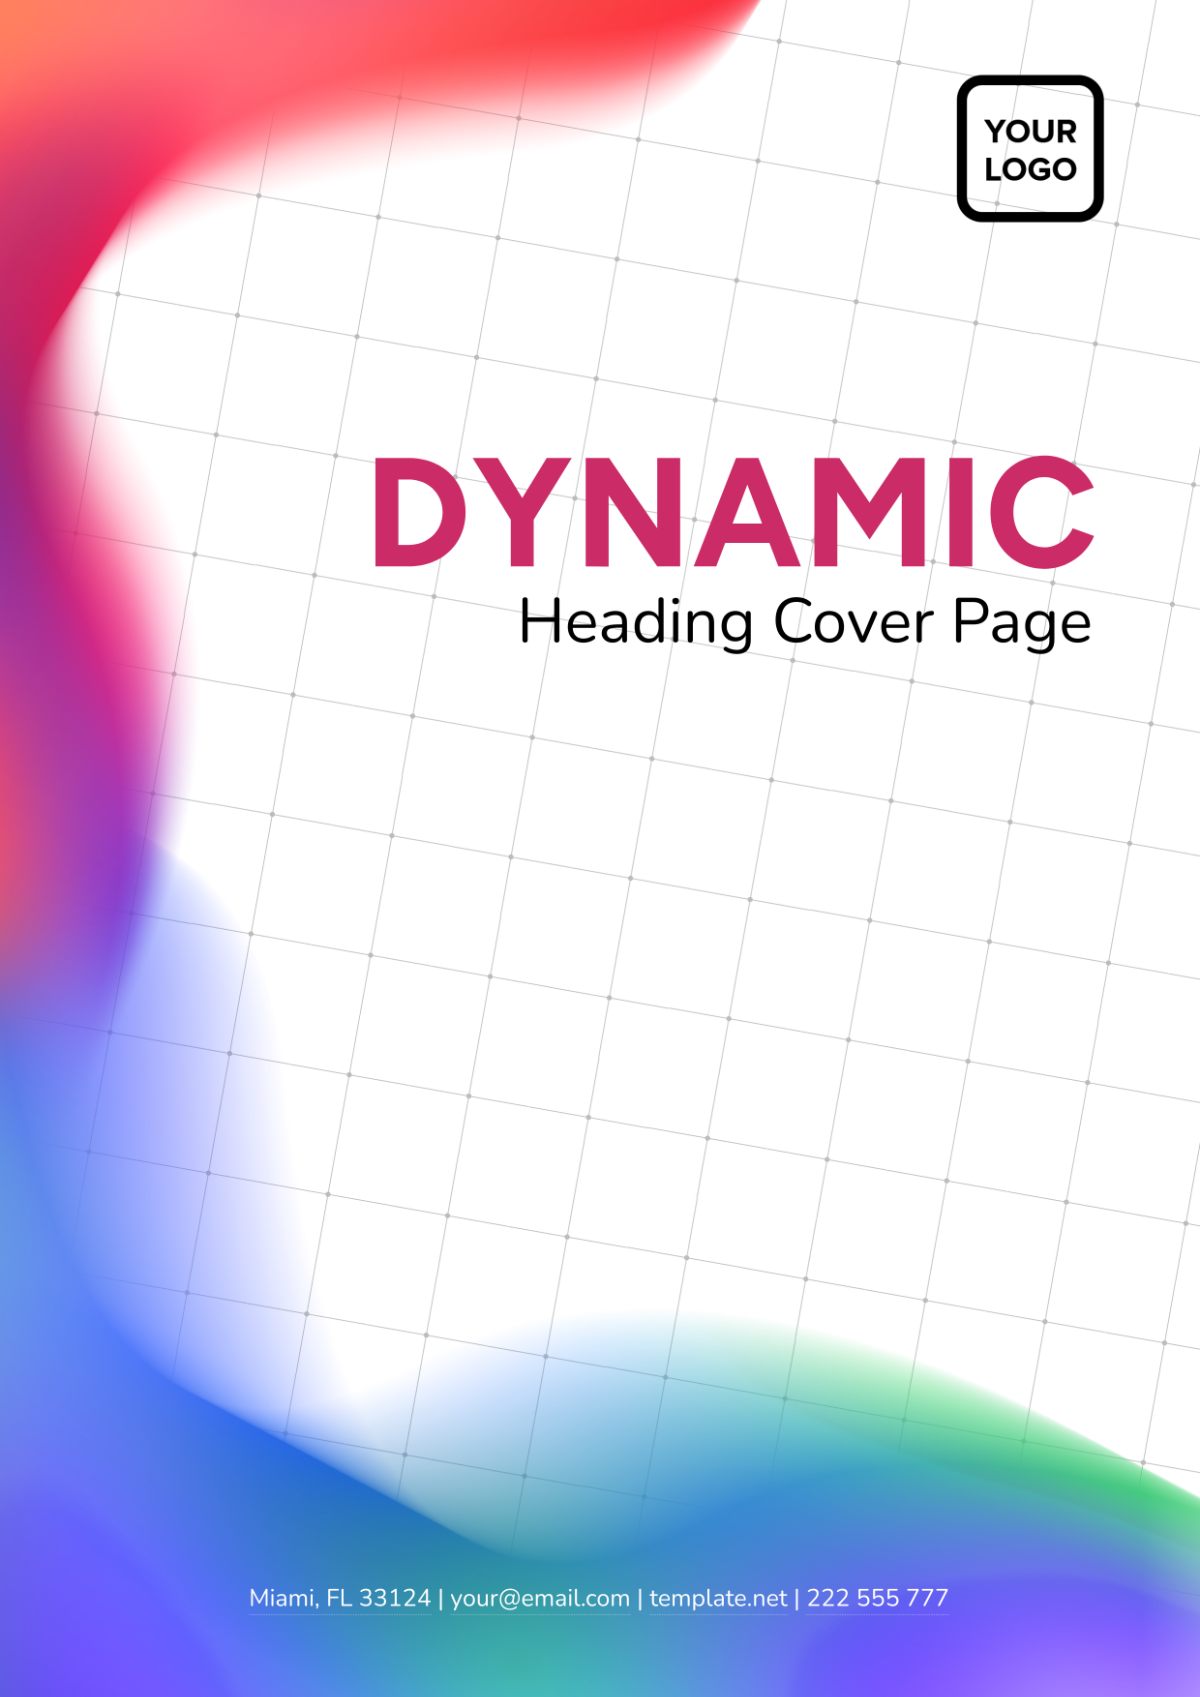 Free Dynamic Heading Cover Page Template